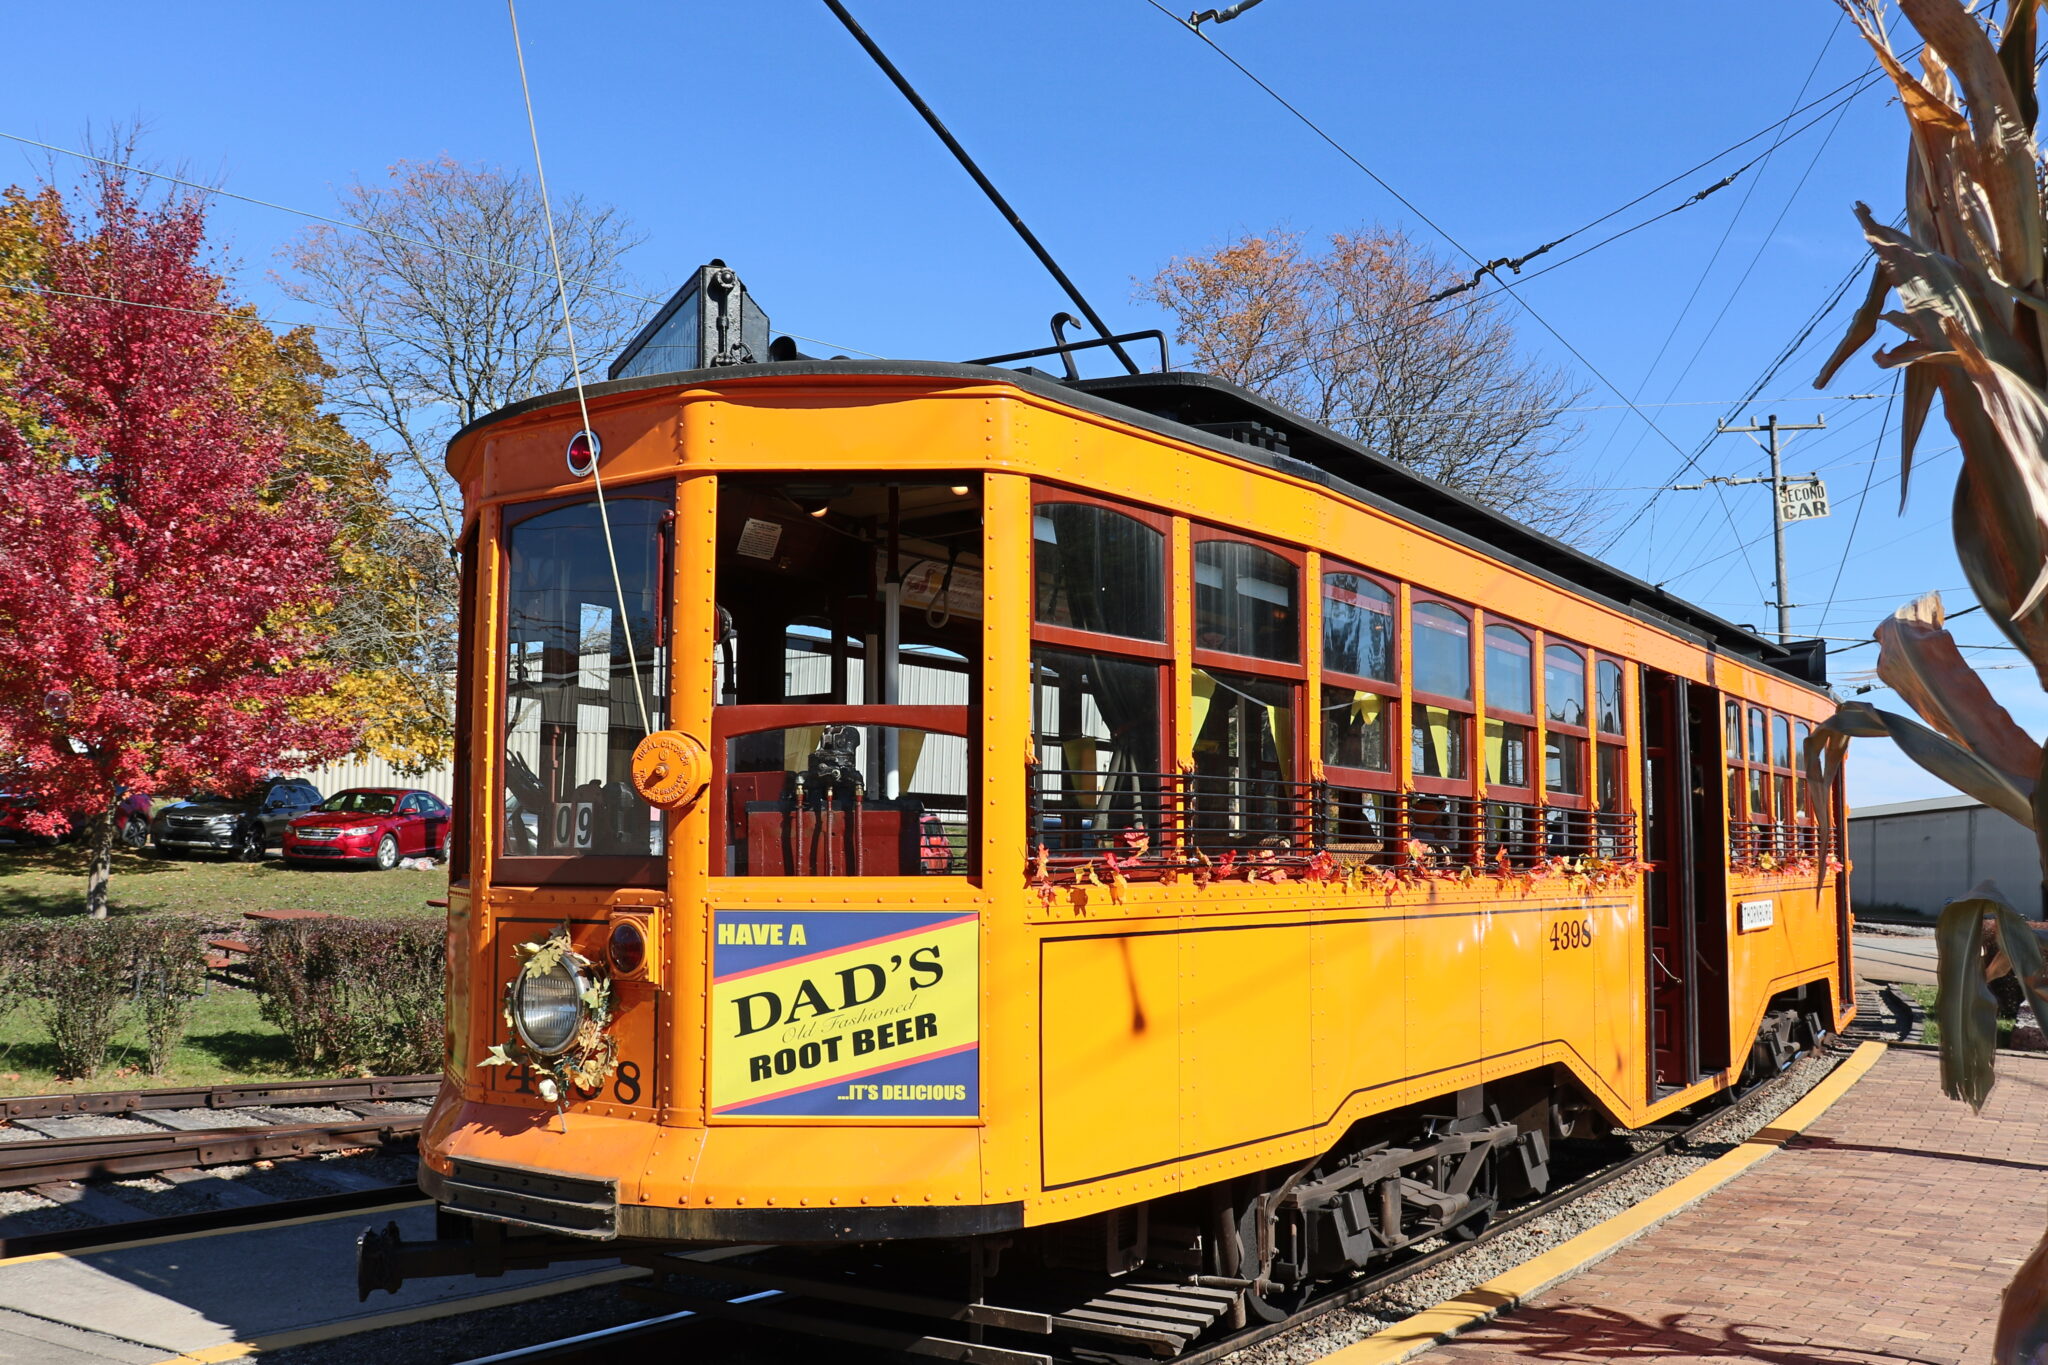 4398 trolley with trees with fall colors in background